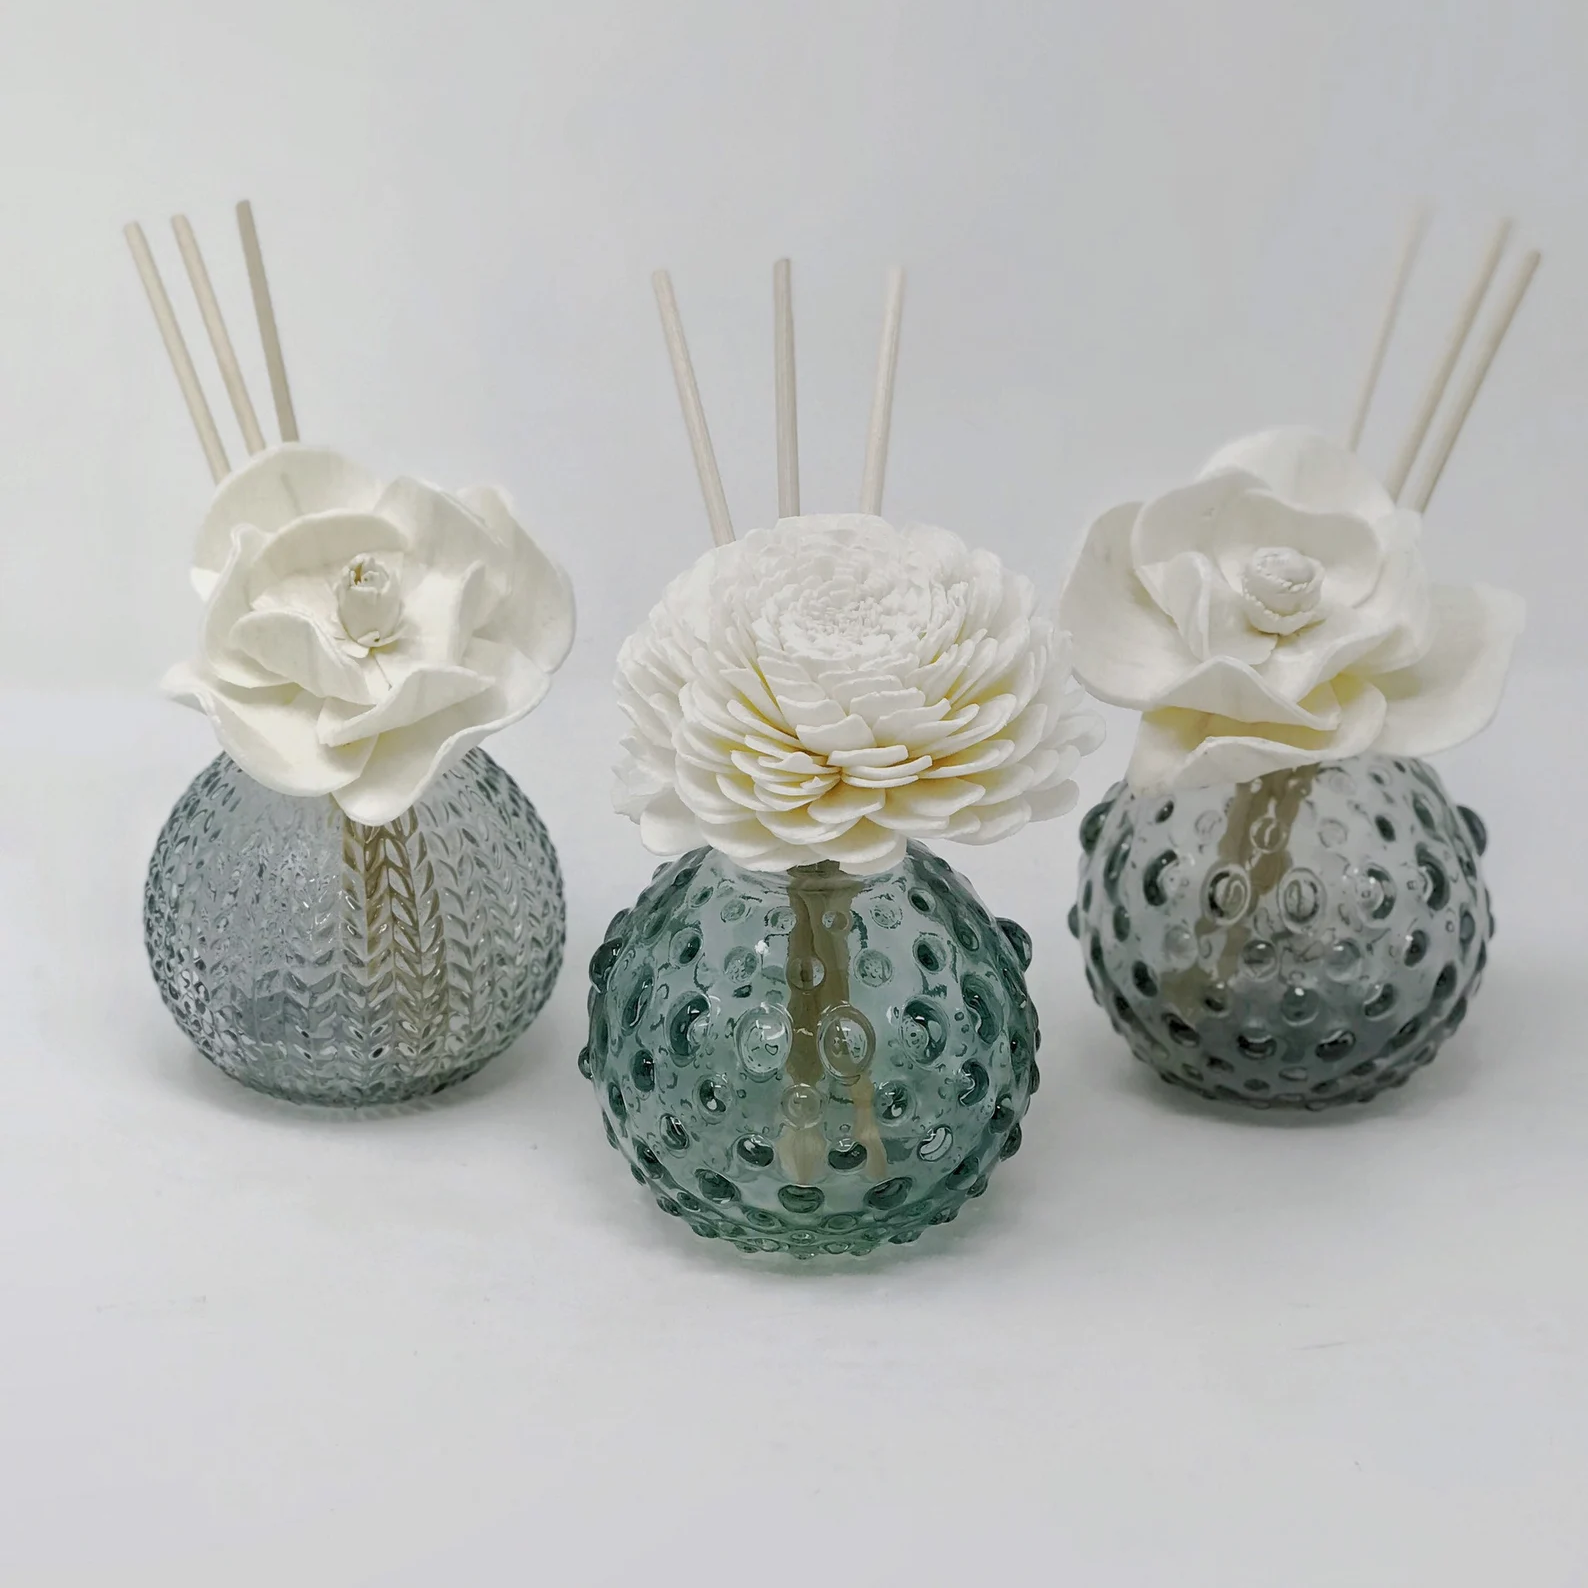 three blue, spherical, textured vases with white flowers and diffuser sticks